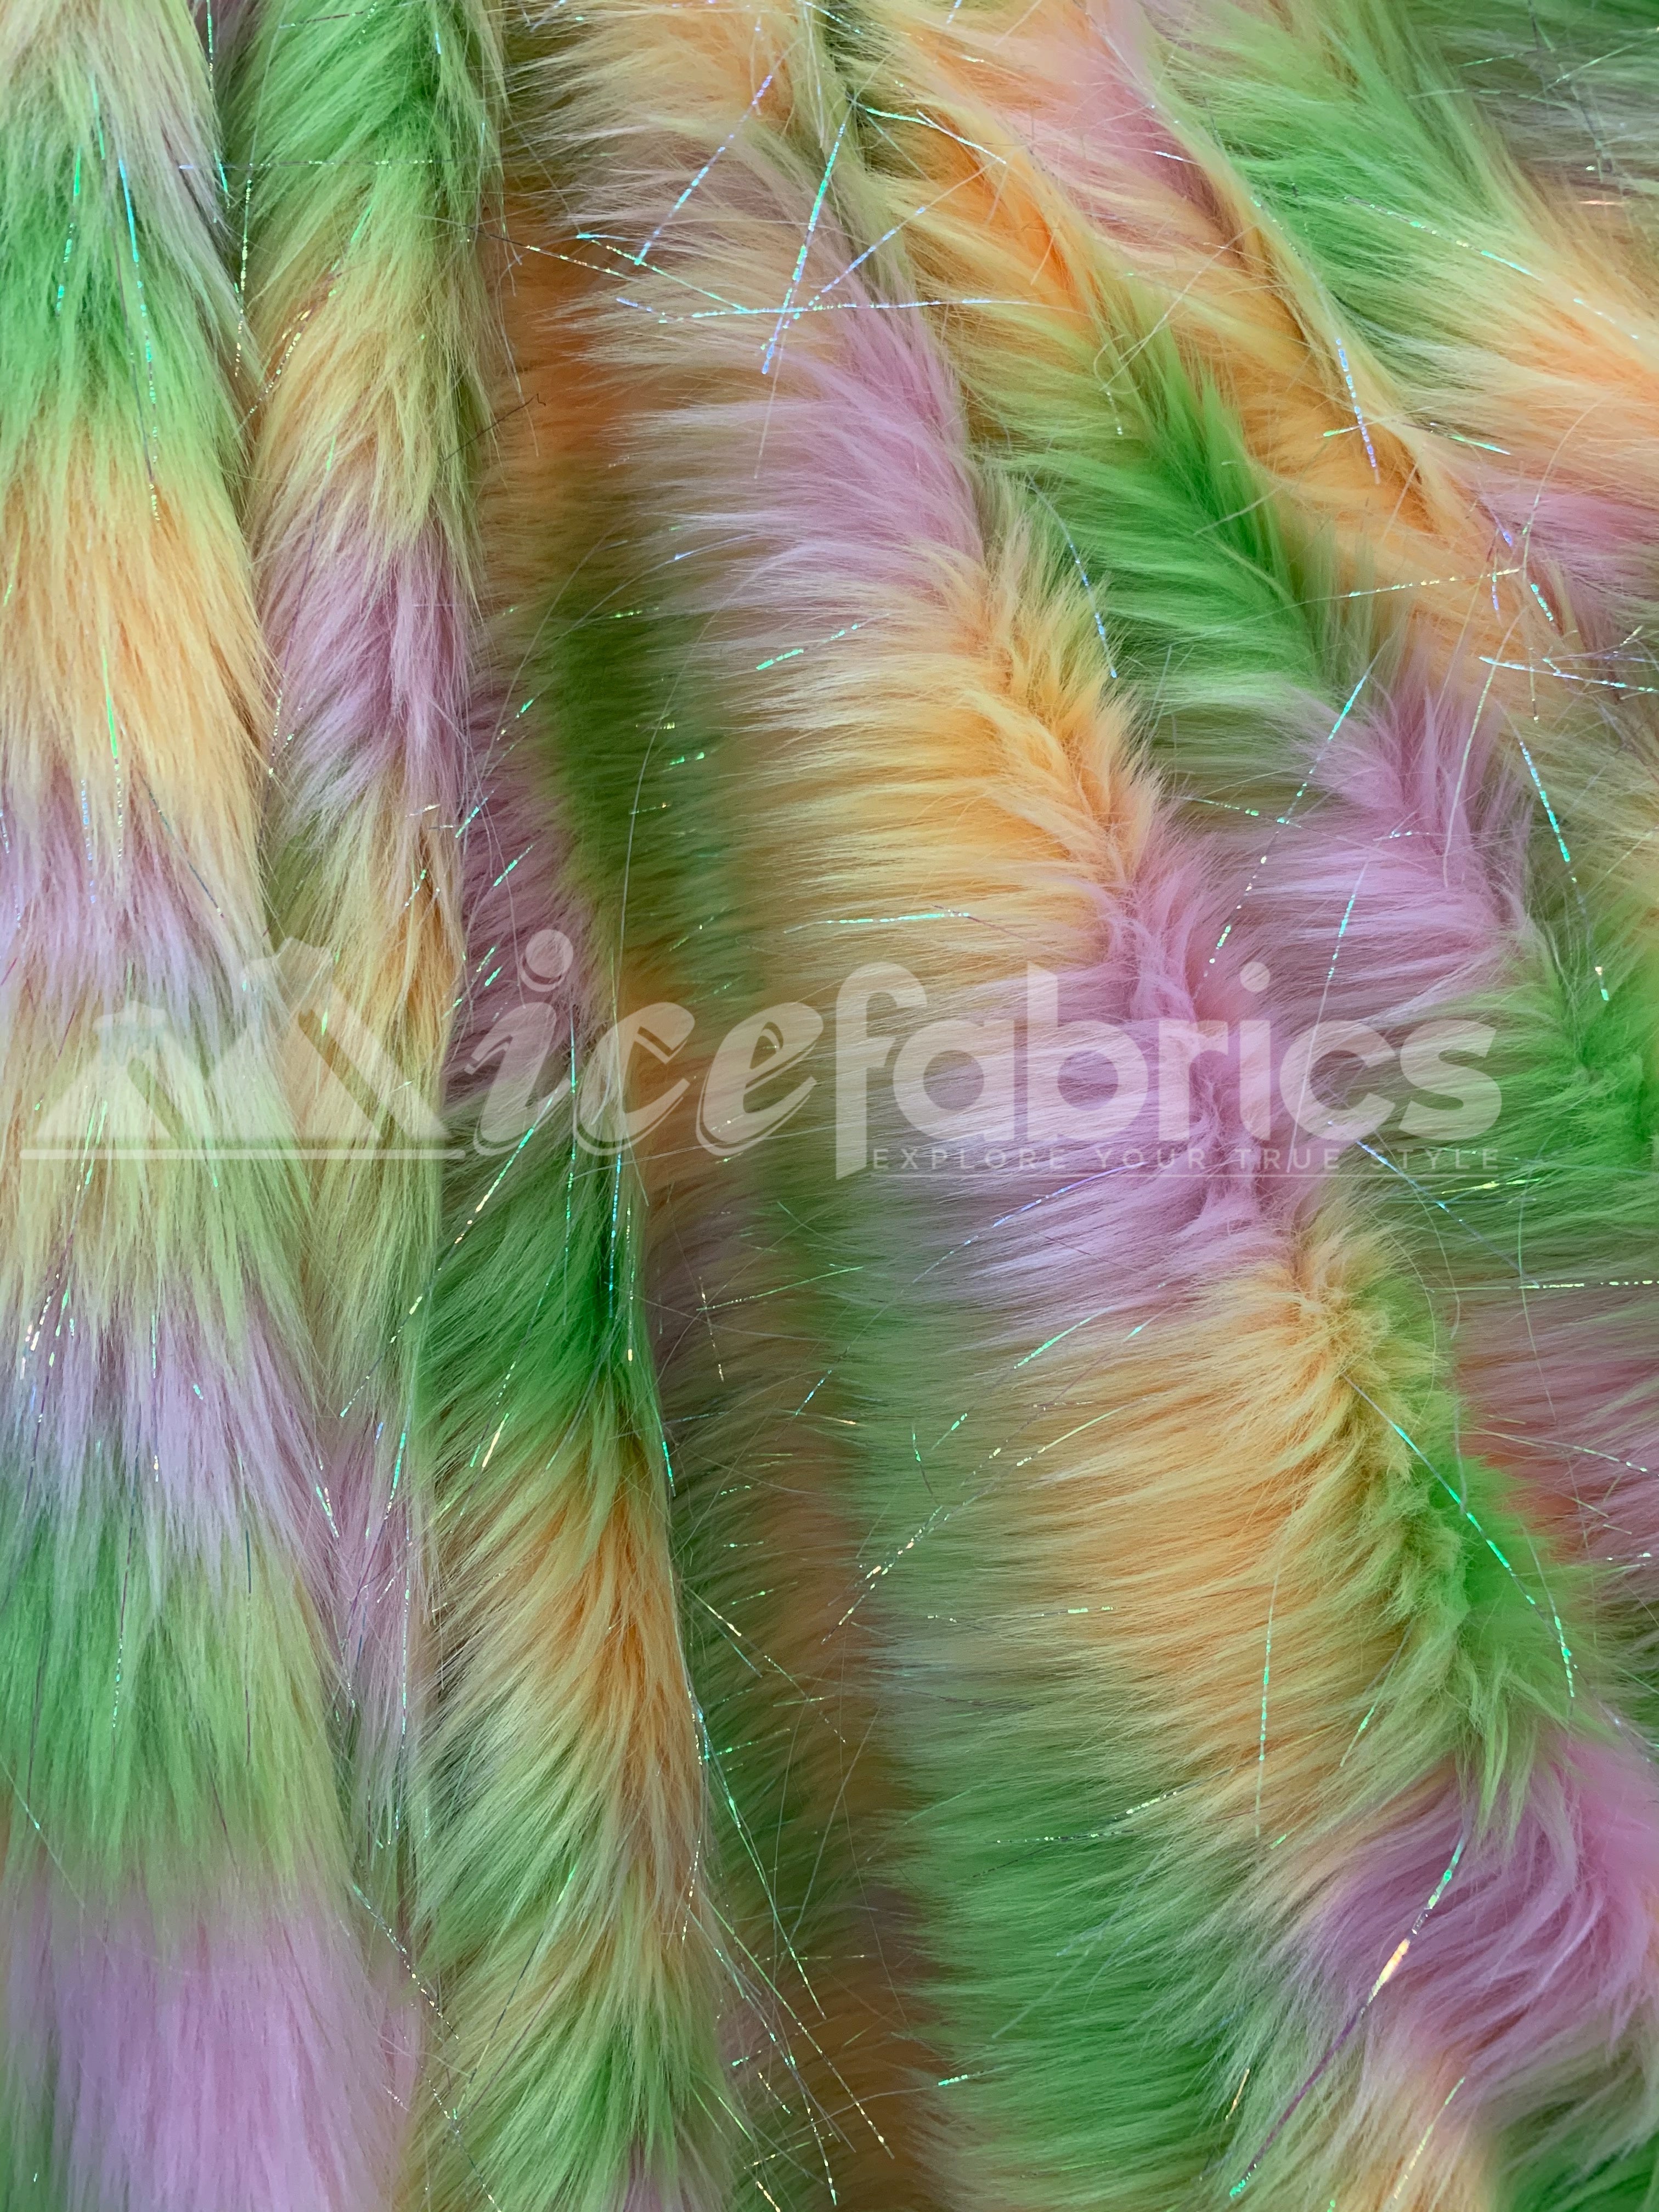 3 Tone Rainbow Tinsel 3.5" long Pile Green, Gold, and White Faux Fur Fabric By The YardICEFABRICICE FABRICSBy The Yard (60 inches Wide)3 Tone Rainbow Tinsel 3.5" long Pile Green, Gold, and White Faux Fur Fabric By The Yard ICEFABRIC